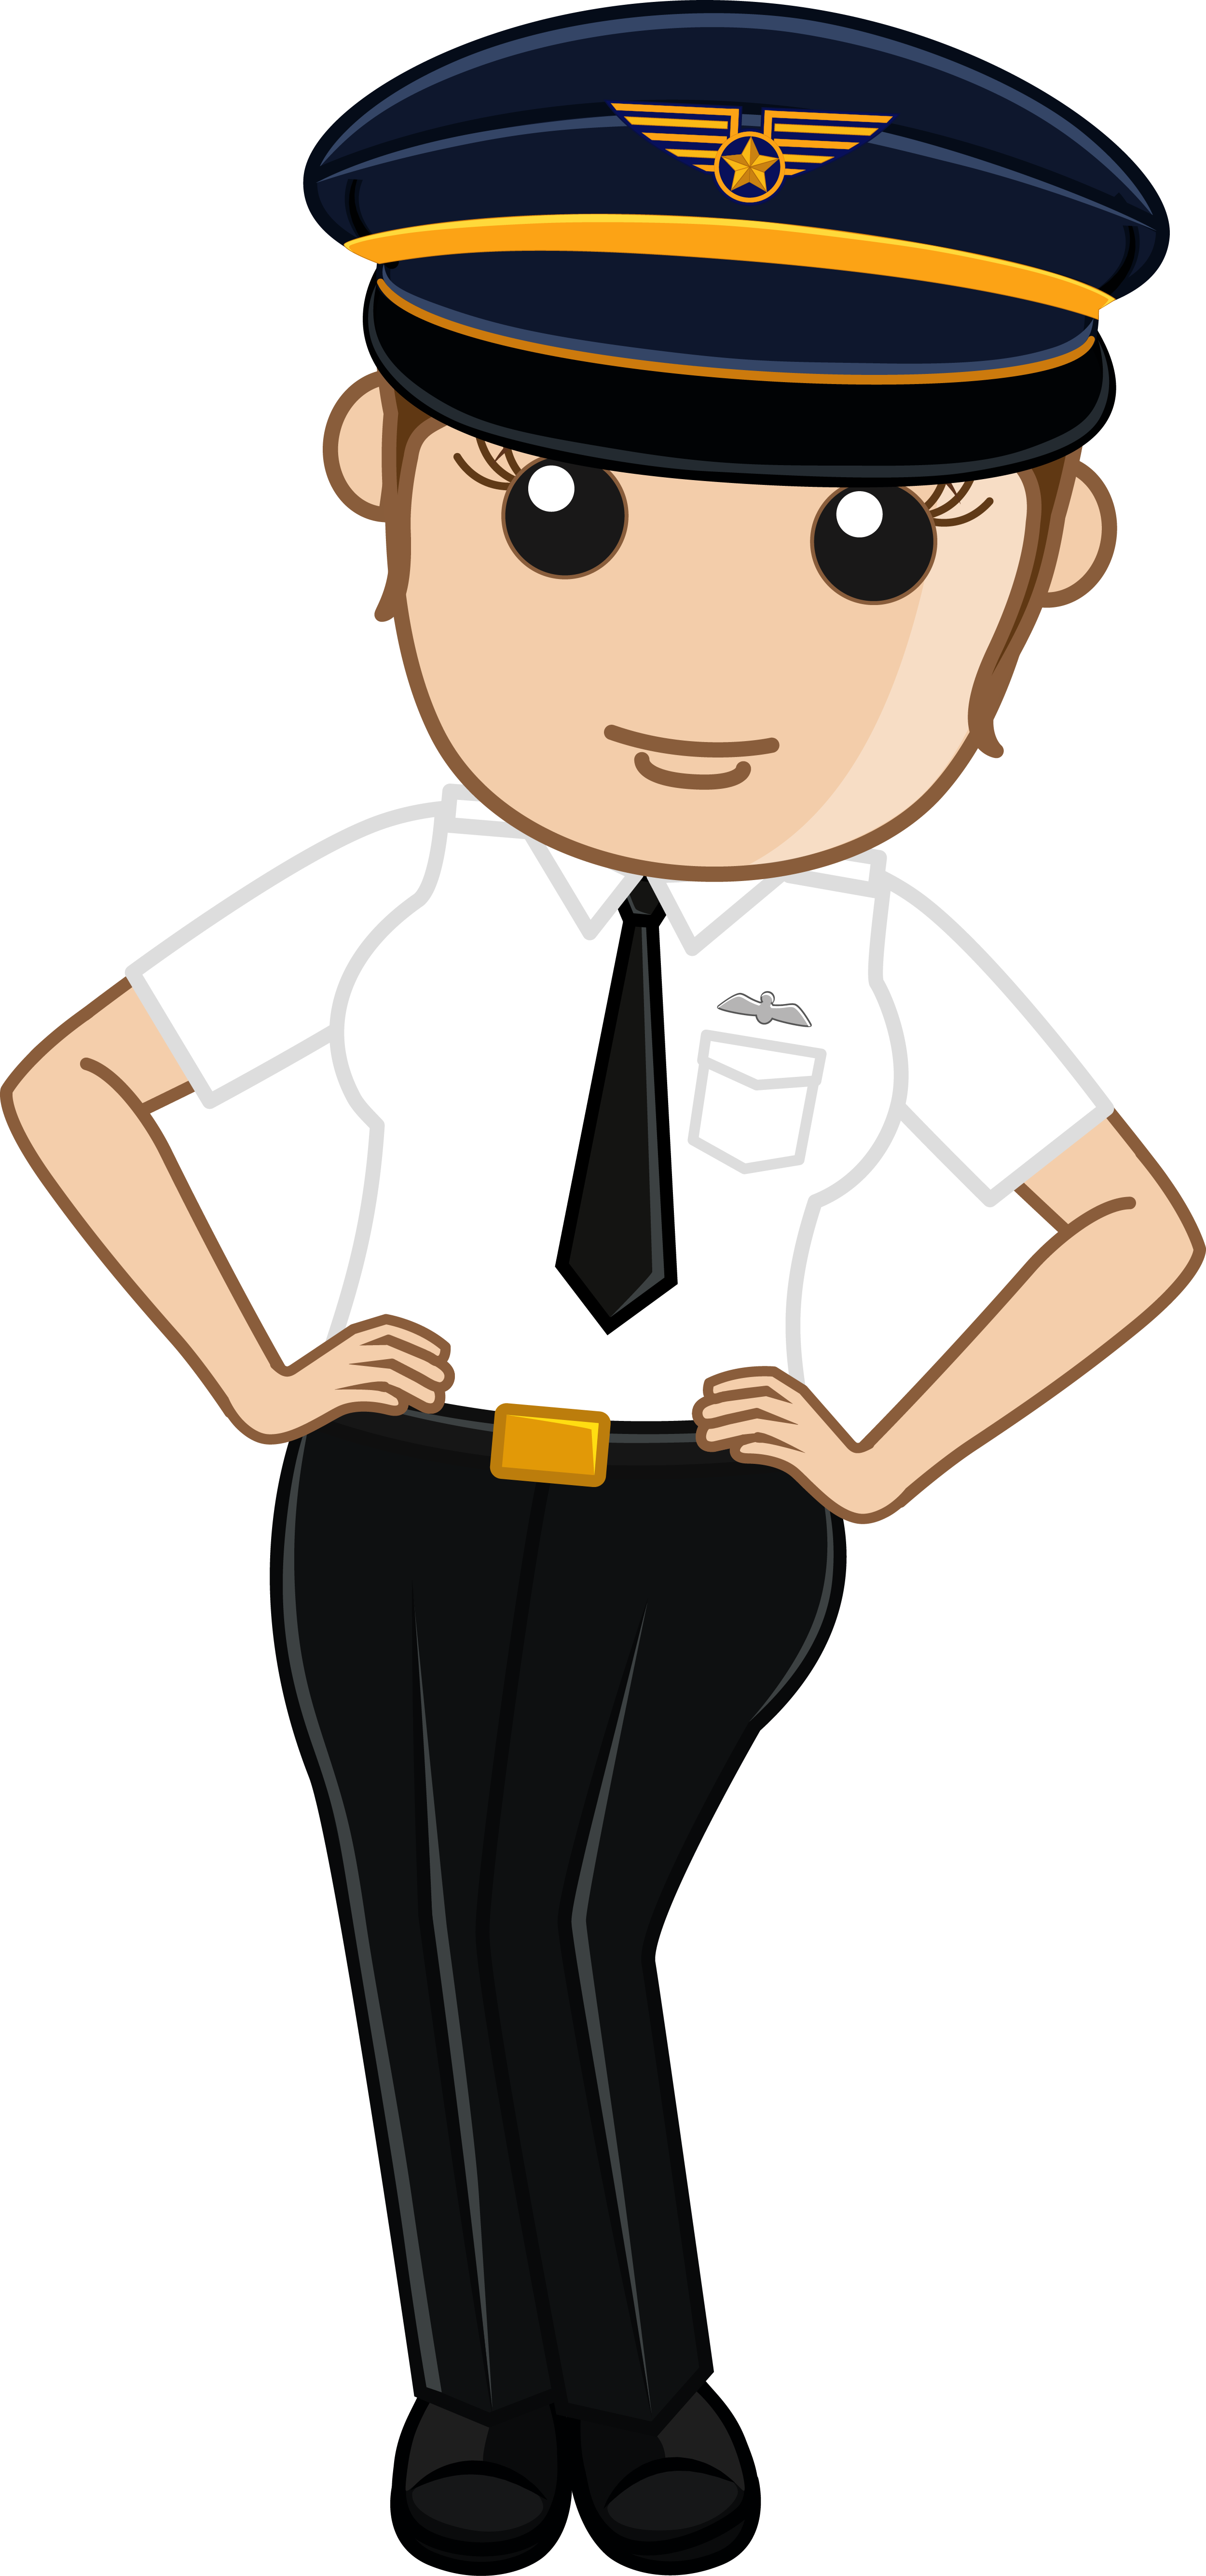 Standing Pose Female Officer Beautiful Lady Pilot Traffic Police Lady Crew Member Officer PNG Clipart